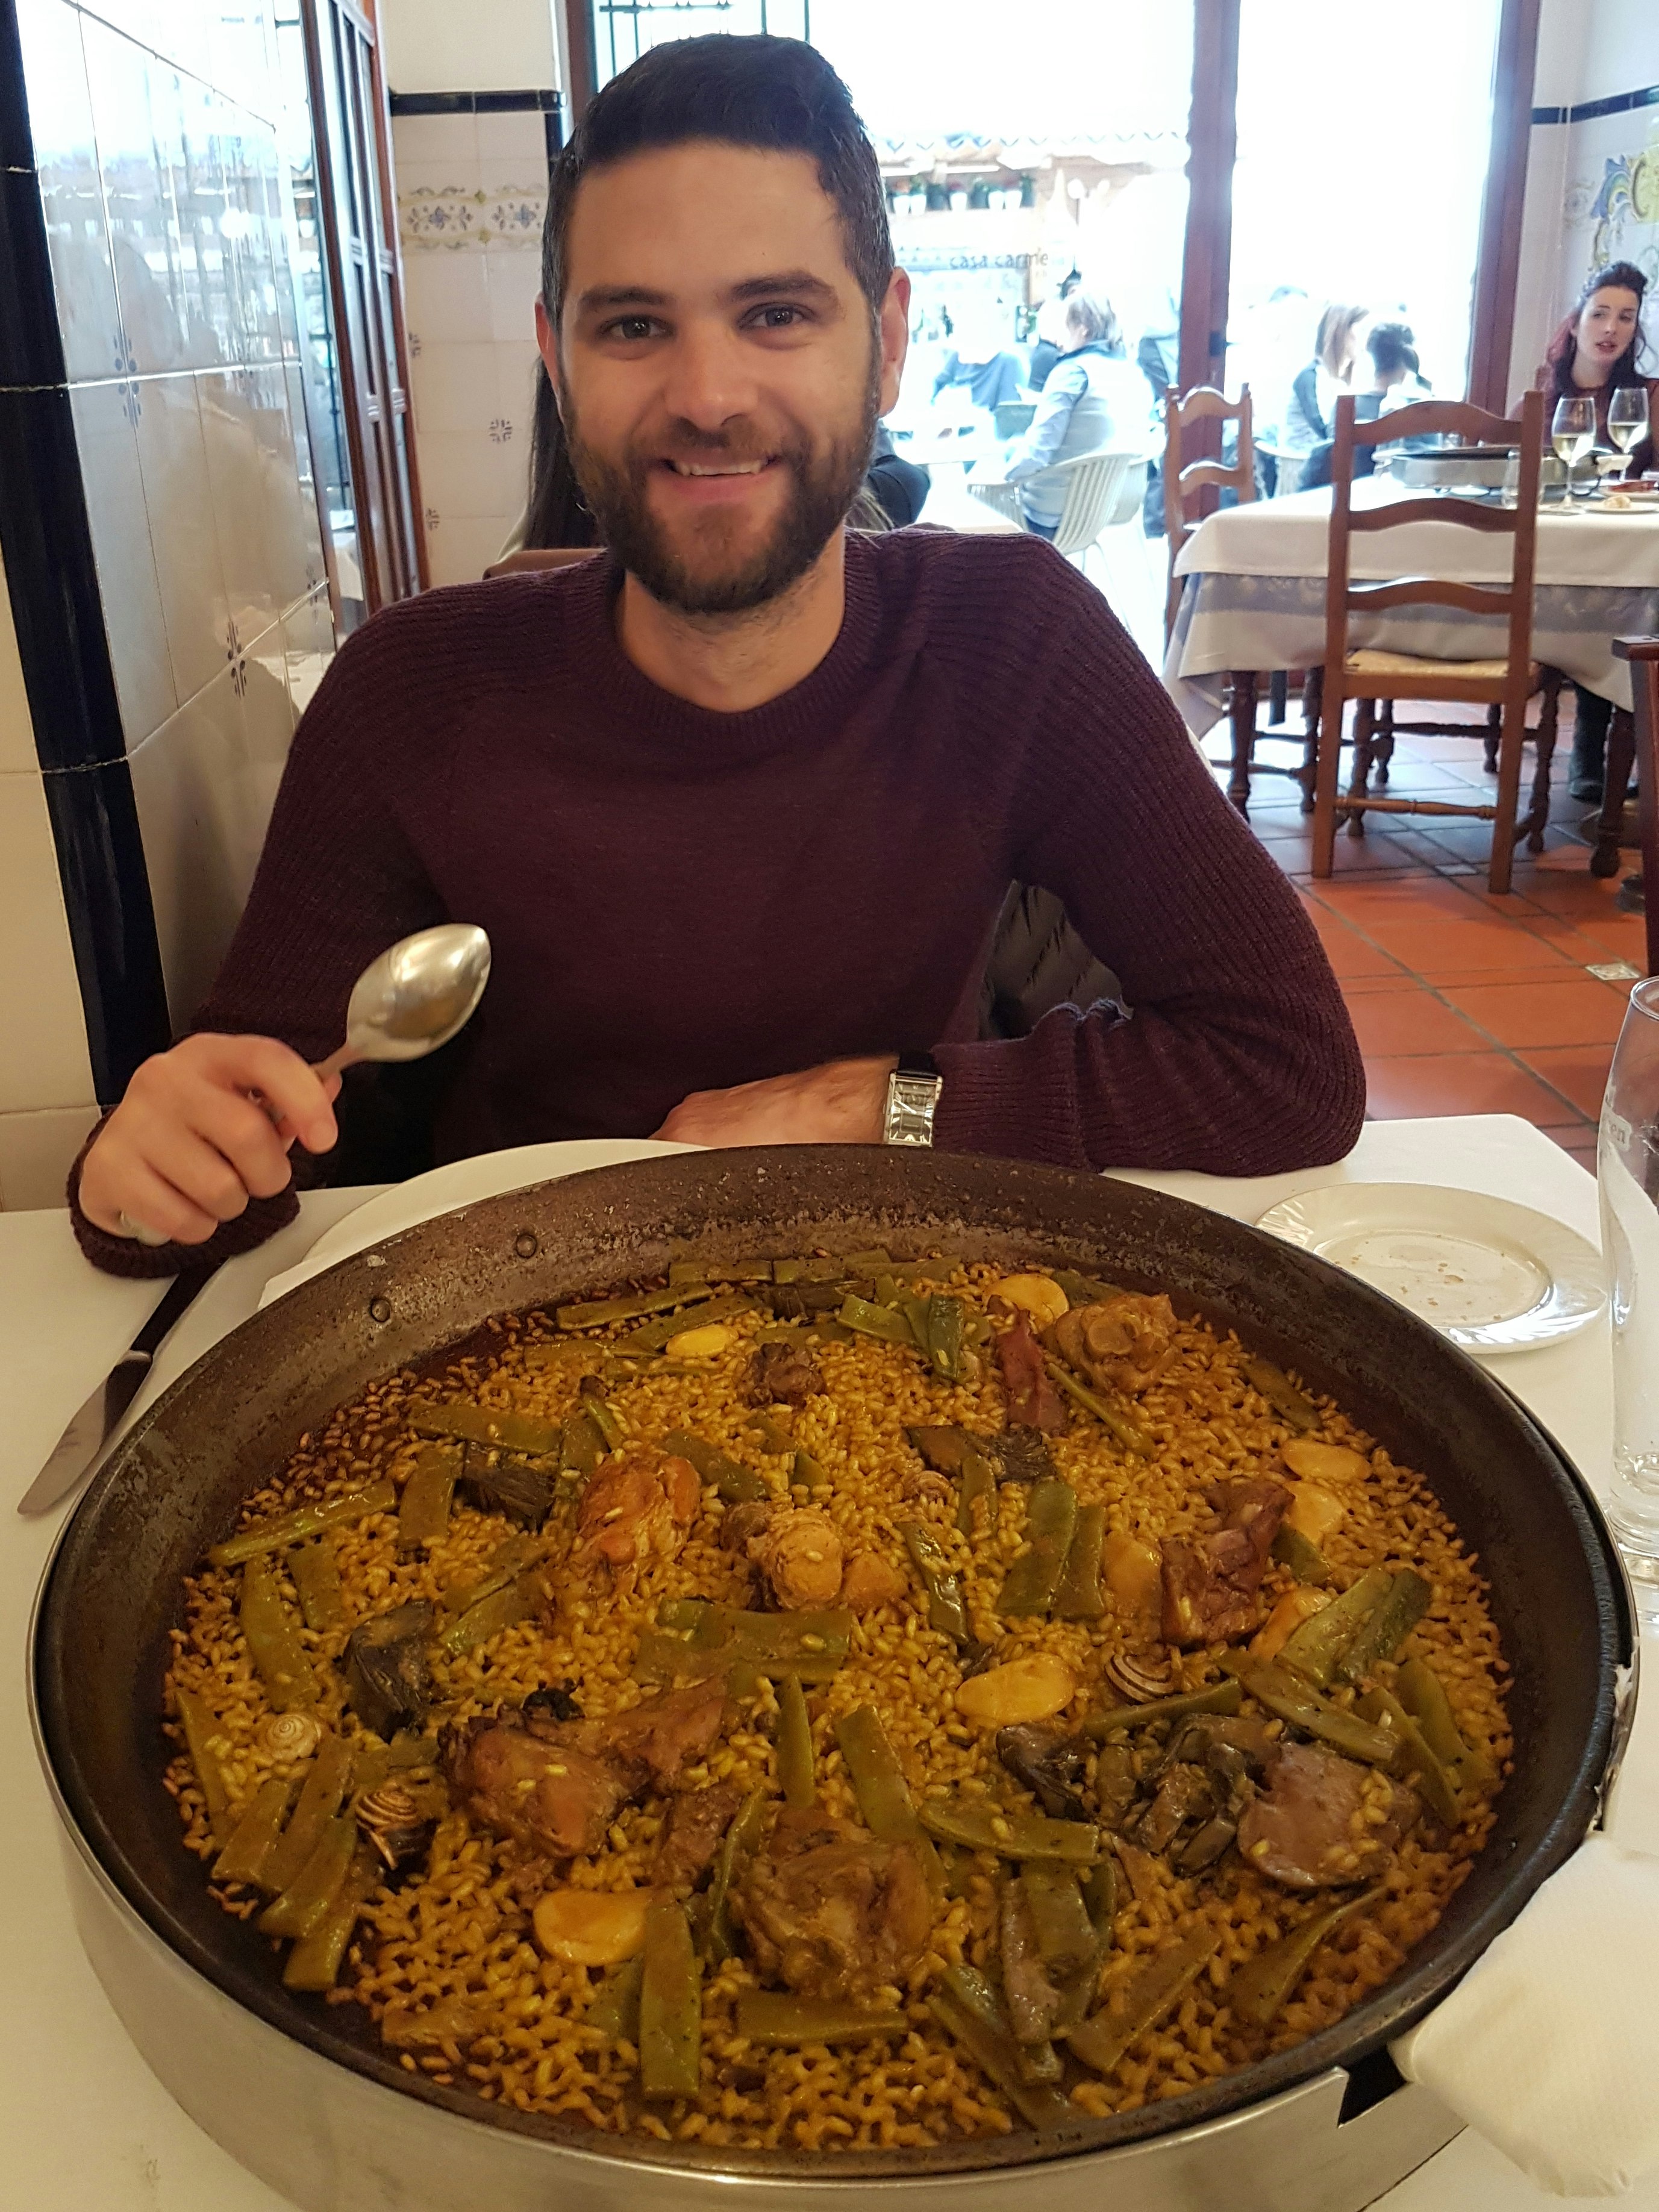 Writer Robert Kidd is sitting in a restaurant, with a huge pan containing traditional paella in front of him. Spoon in hand, waiting to dish up, he smiles broadly at the camera.